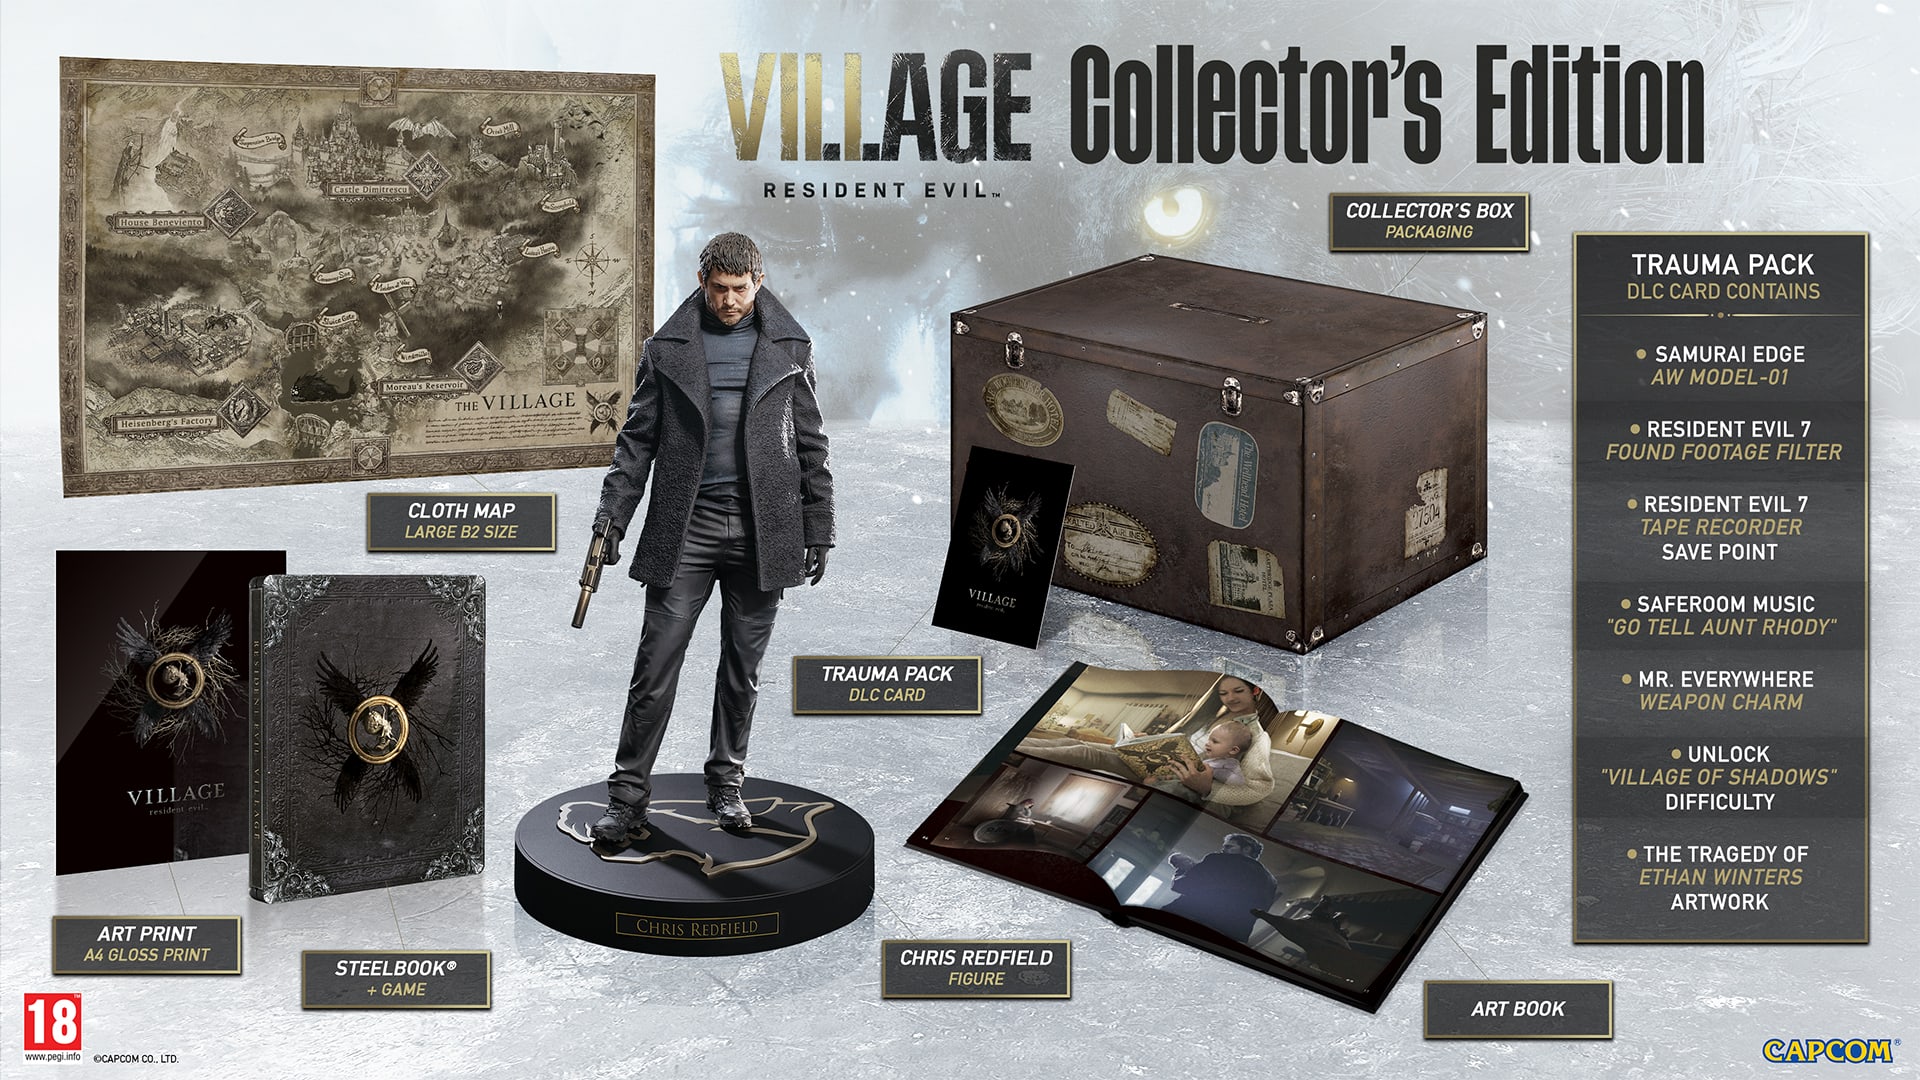 Resident Evil 8: Village - Collector's Edition (PS4), Capcom